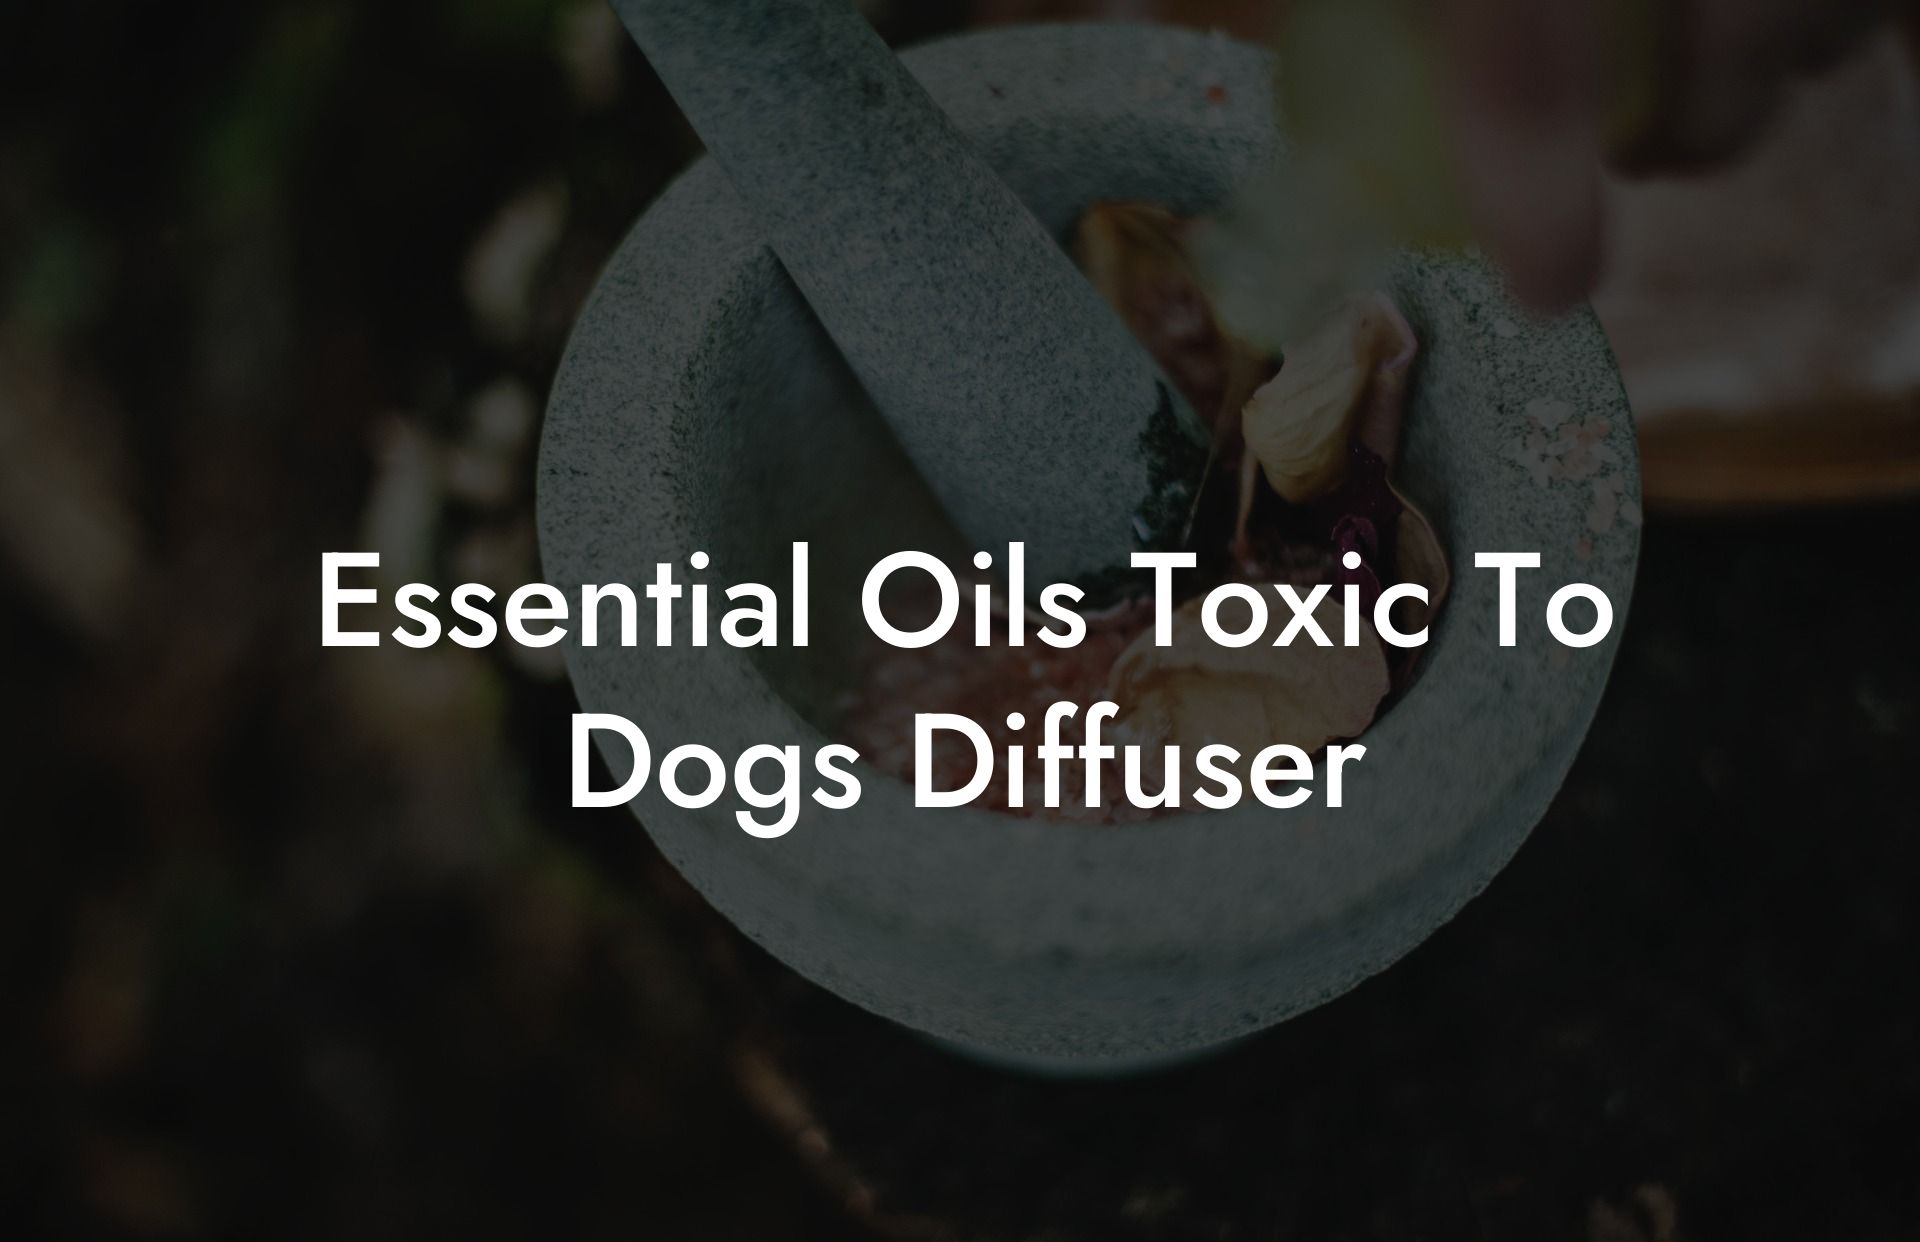 Essential Oils Toxic To Dogs Diffuser